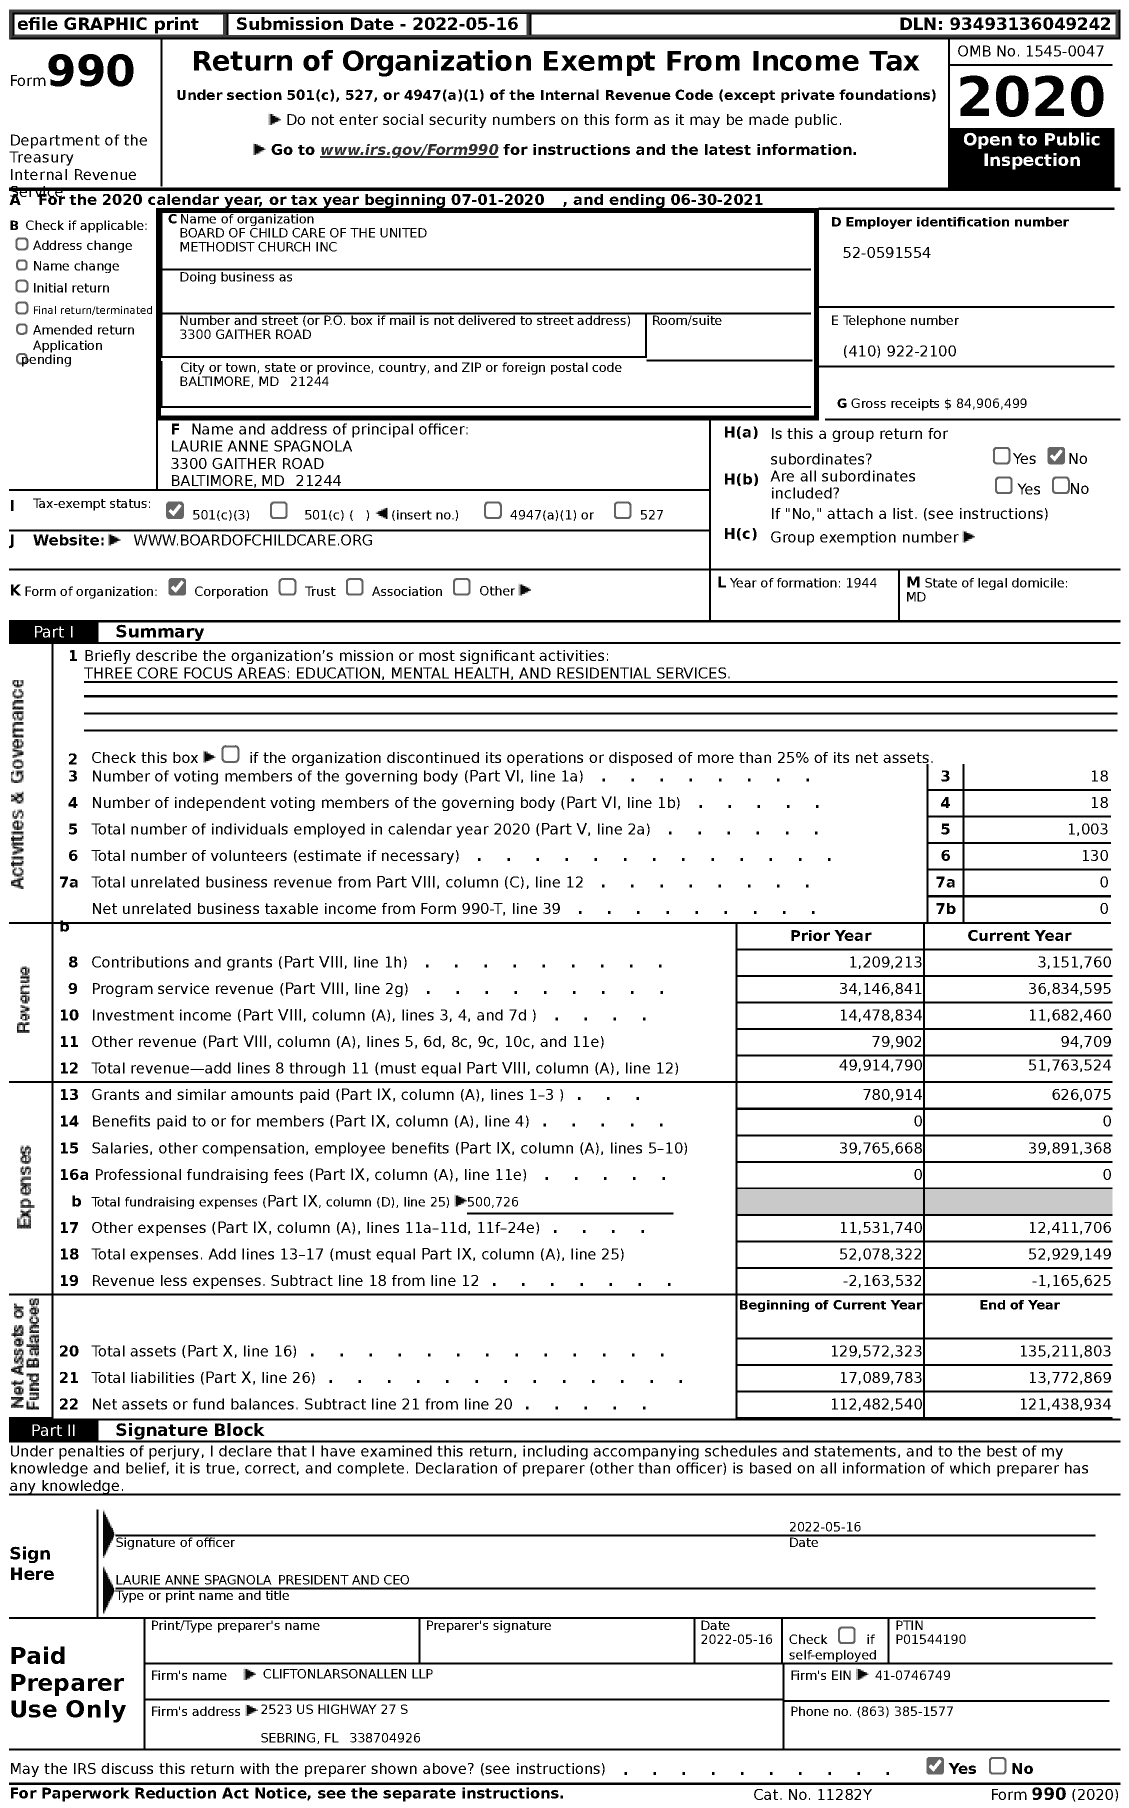 Image of first page of 2020 Form 990 for Board of Child Care (BCC)